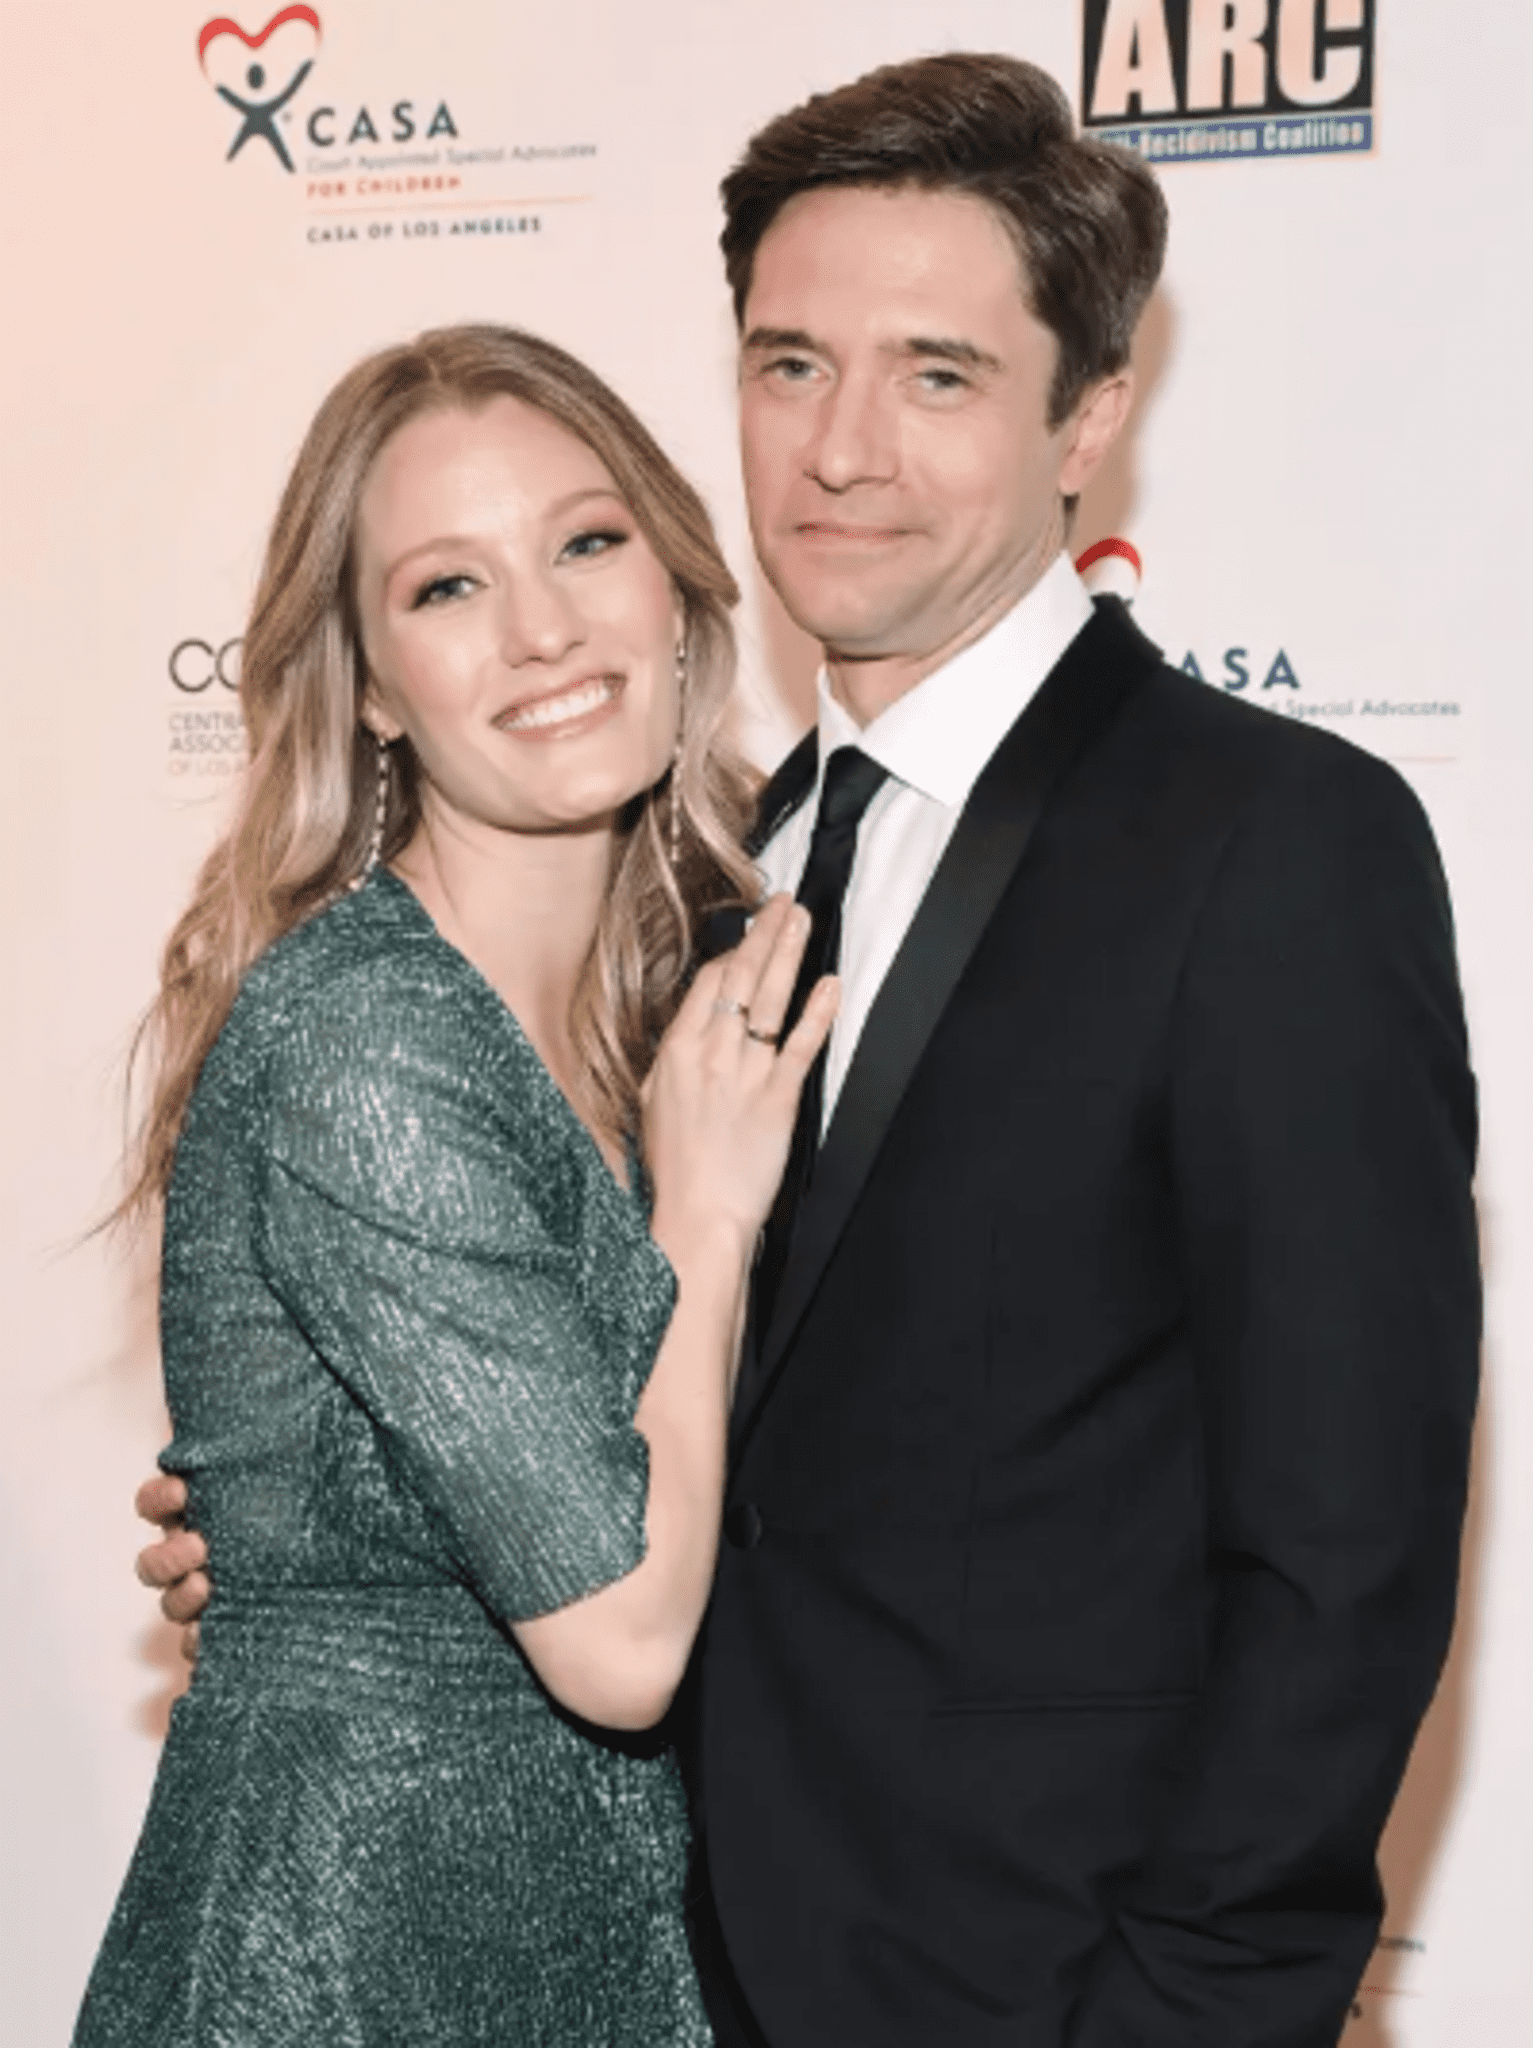 Topher Grace and his wife, actress Ashley Hinshaw, are welcoming their third child.